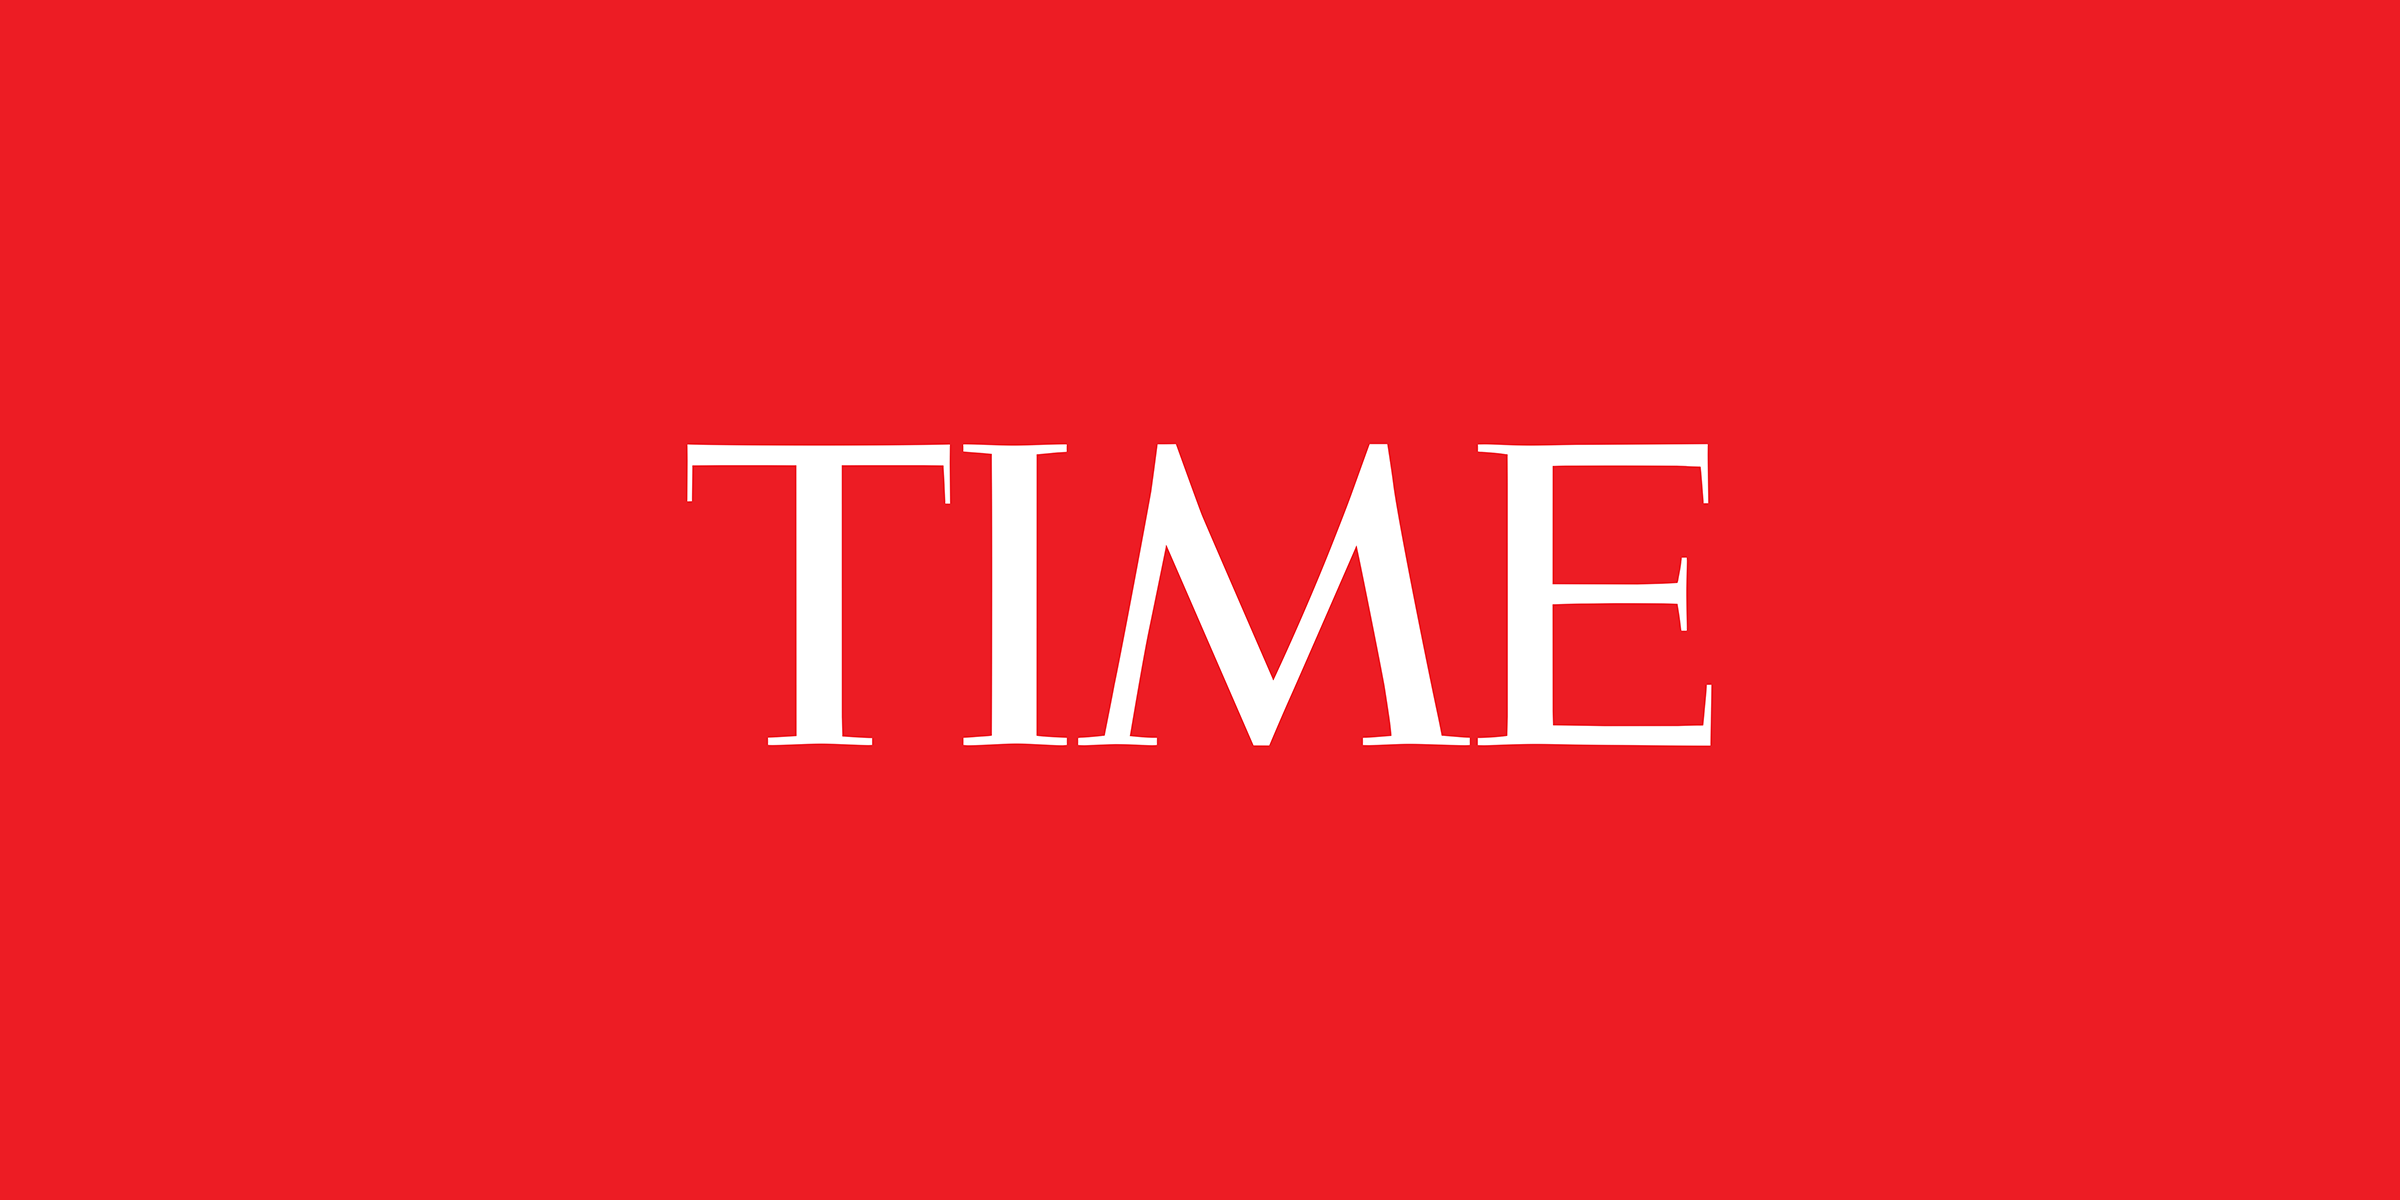 Time launches Lightbox photography blog